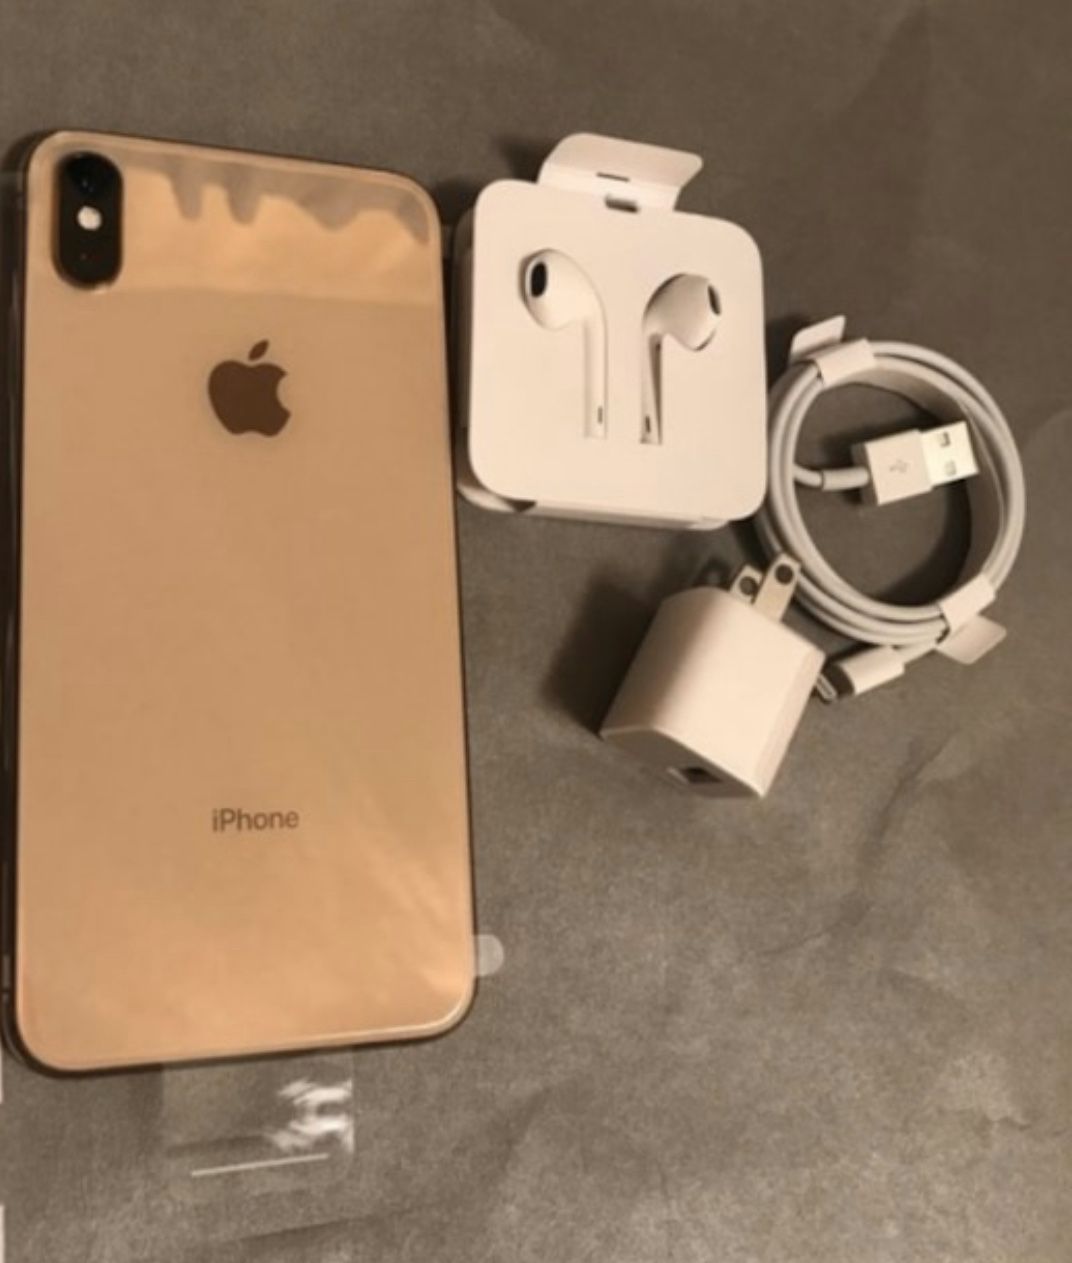 IPhone XS Max (NOT FREE)